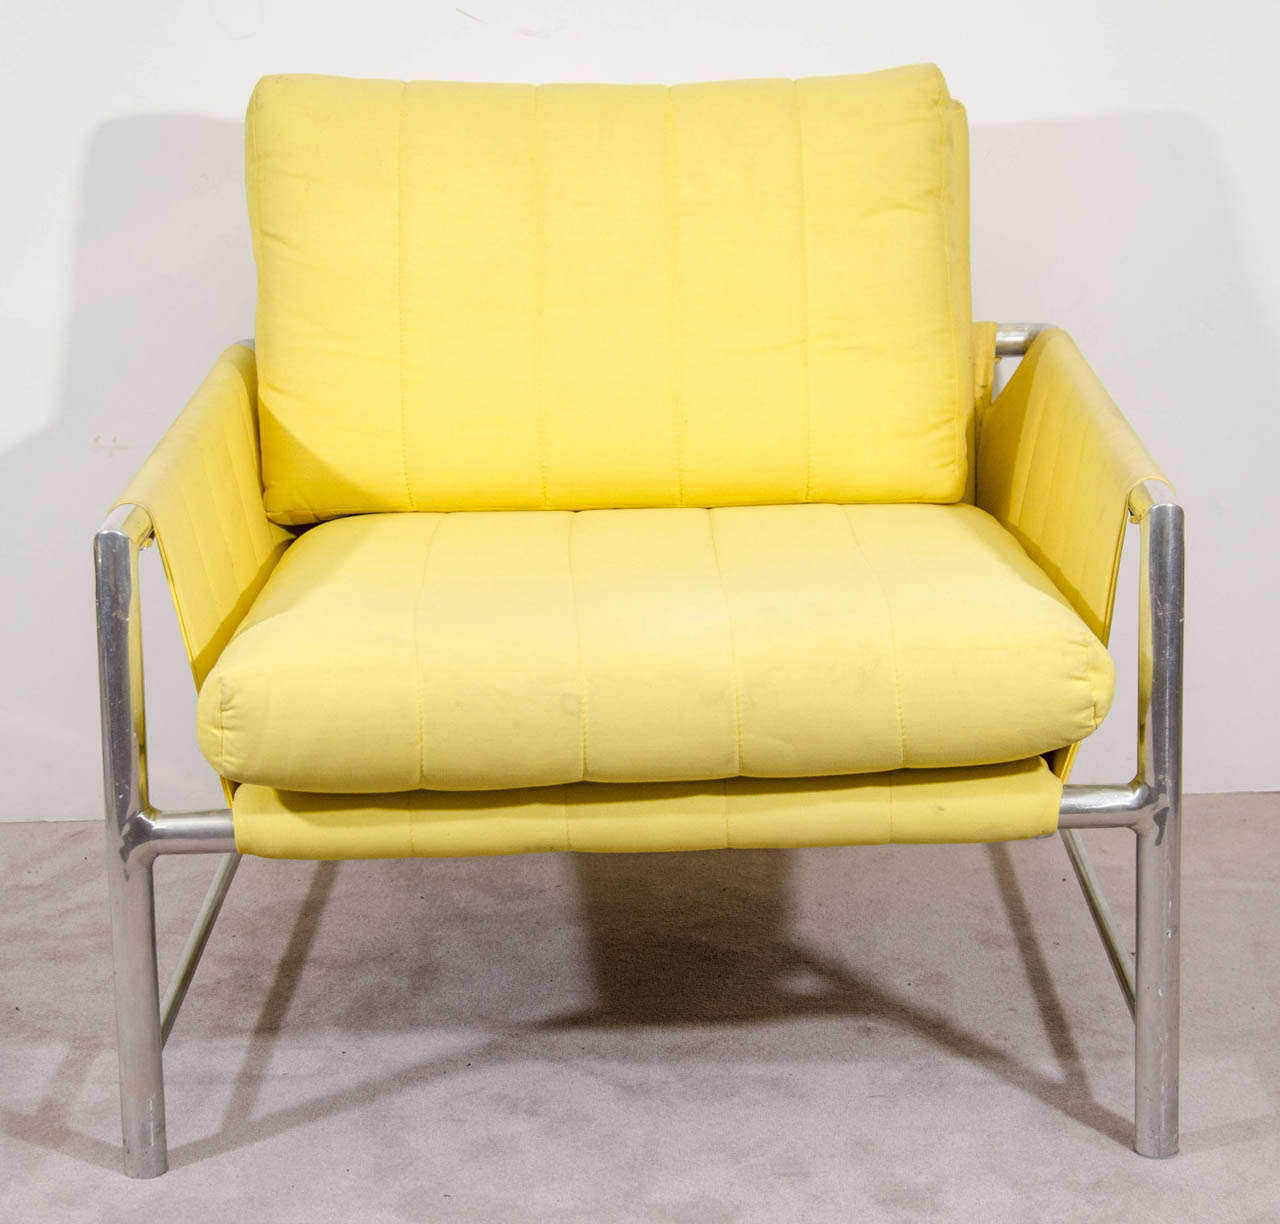 A vintage metal armchair in the style of Milo Baughman upholstered in lemon yellow fabric.  Good vintage condition with some scratches to the fame and some spotting to the upholstery.